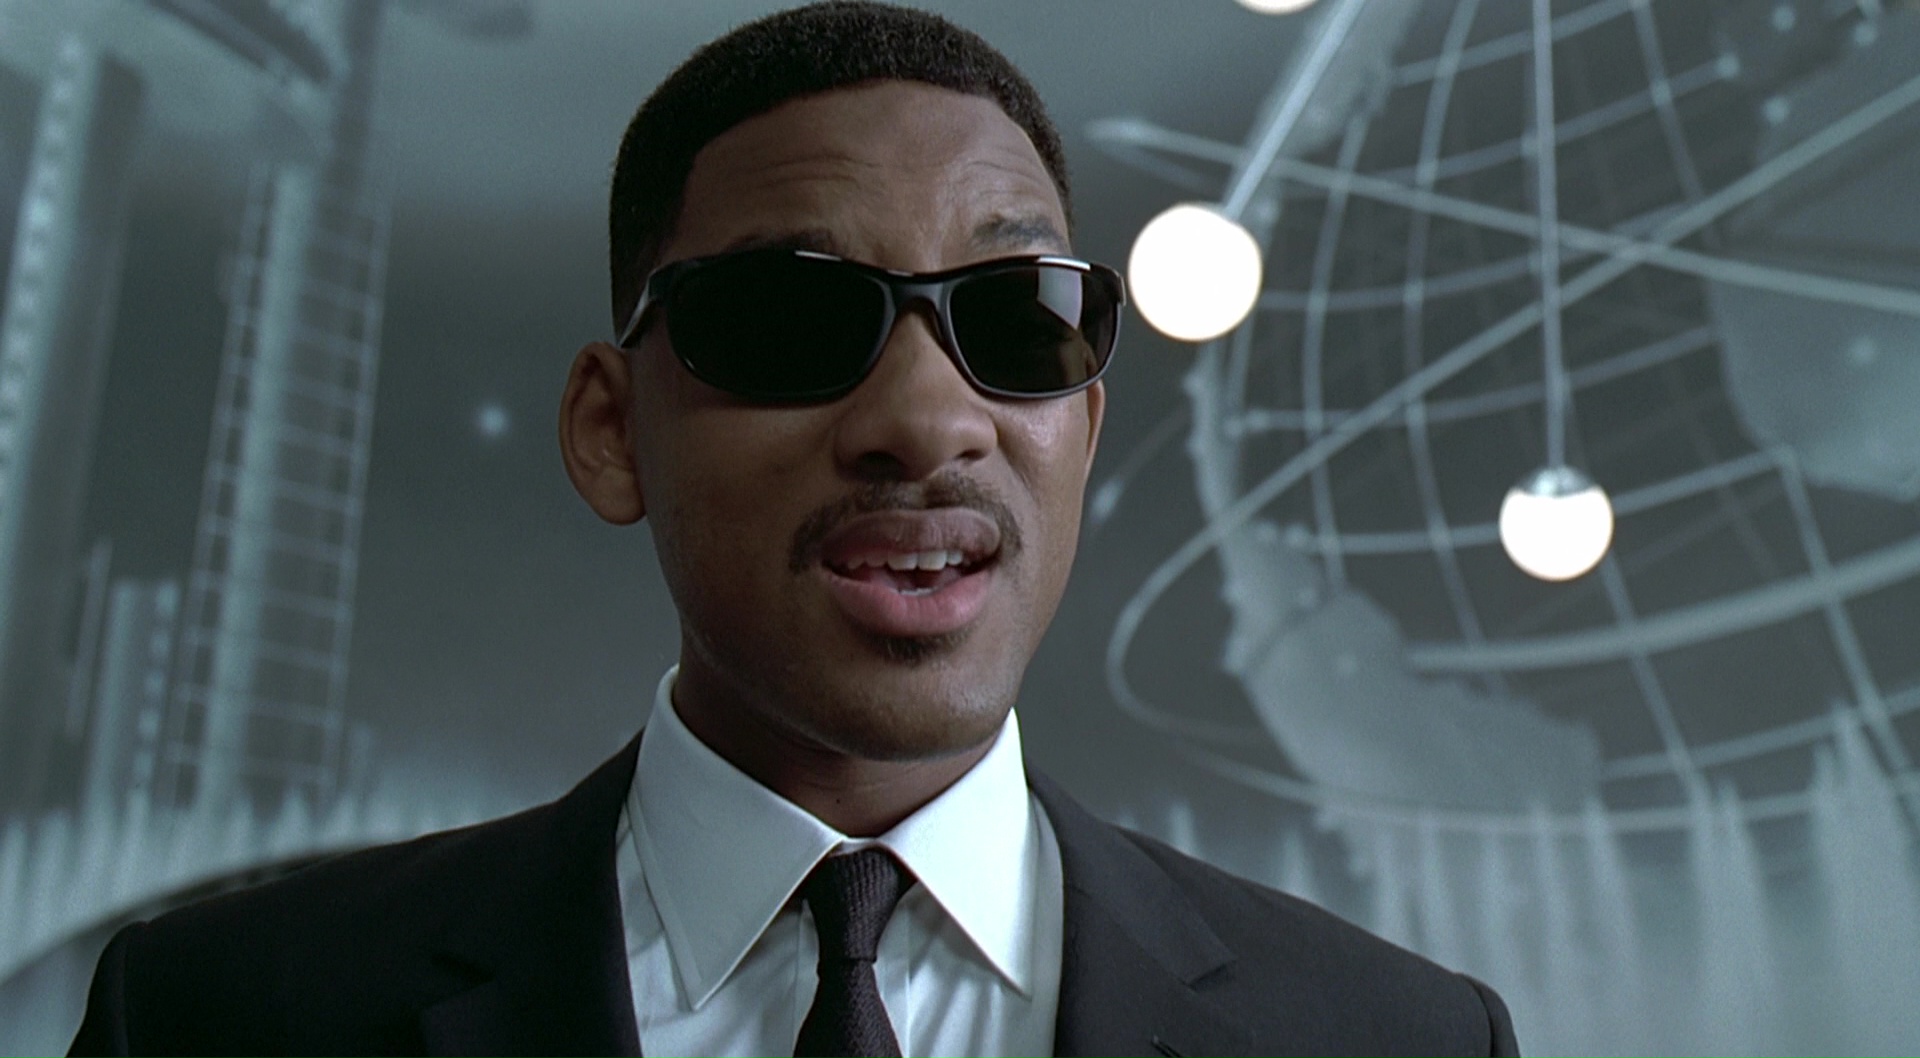 Ray Ban Predator Sunglasses With Black Frame Worn By Will Smith In Men In Black 1997